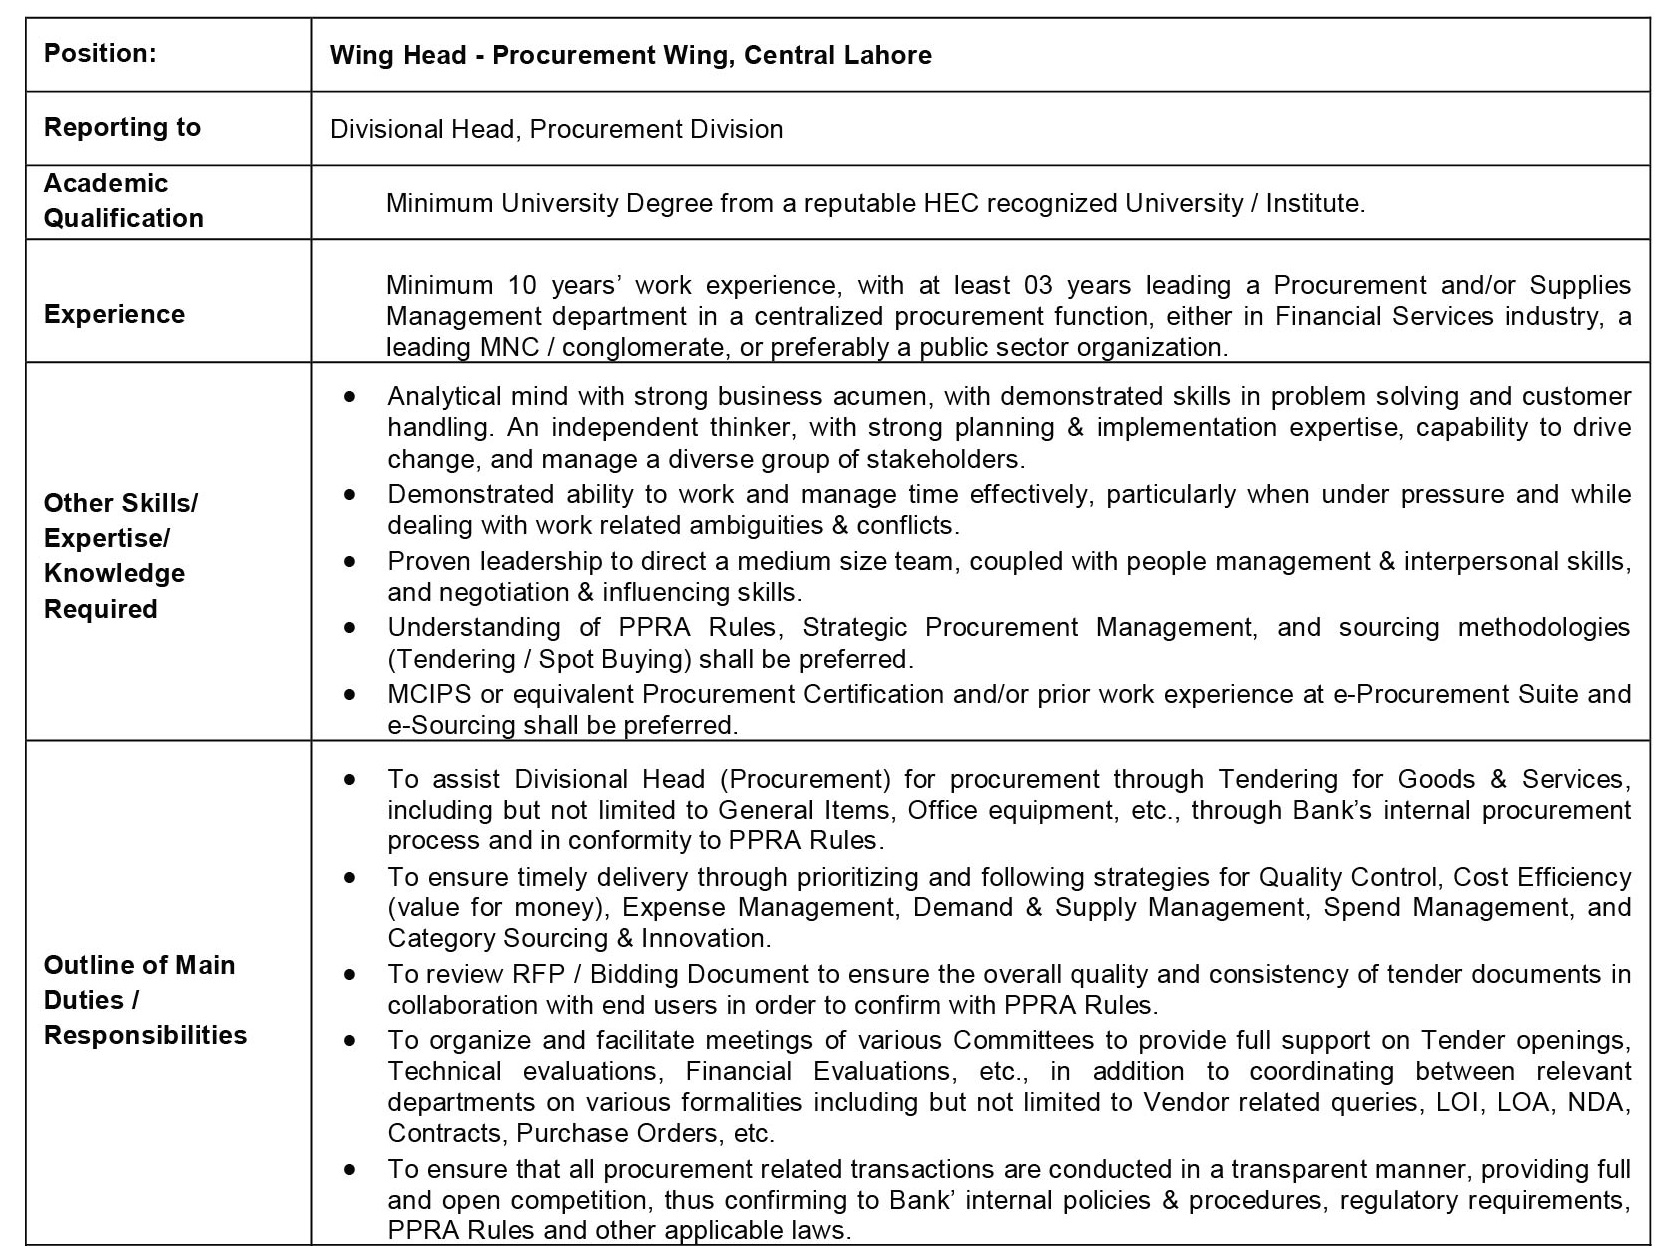 • Wing Head Procurement Wing -Central Lahore